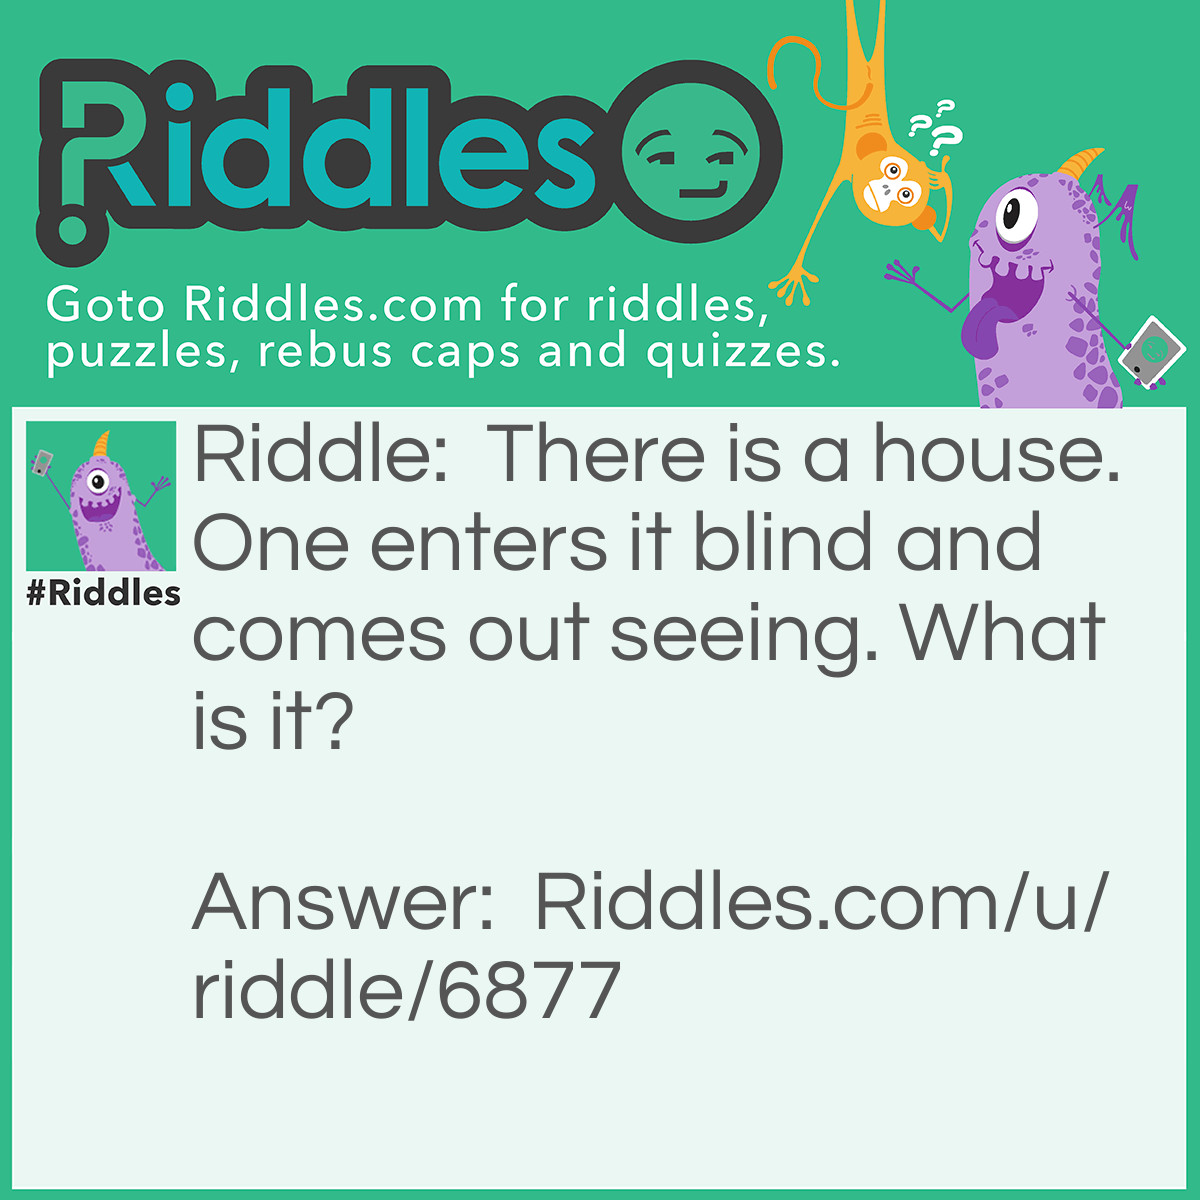 Riddle: There is a house. One enters it blind and comes out seeing. What is it? Answer: A School.